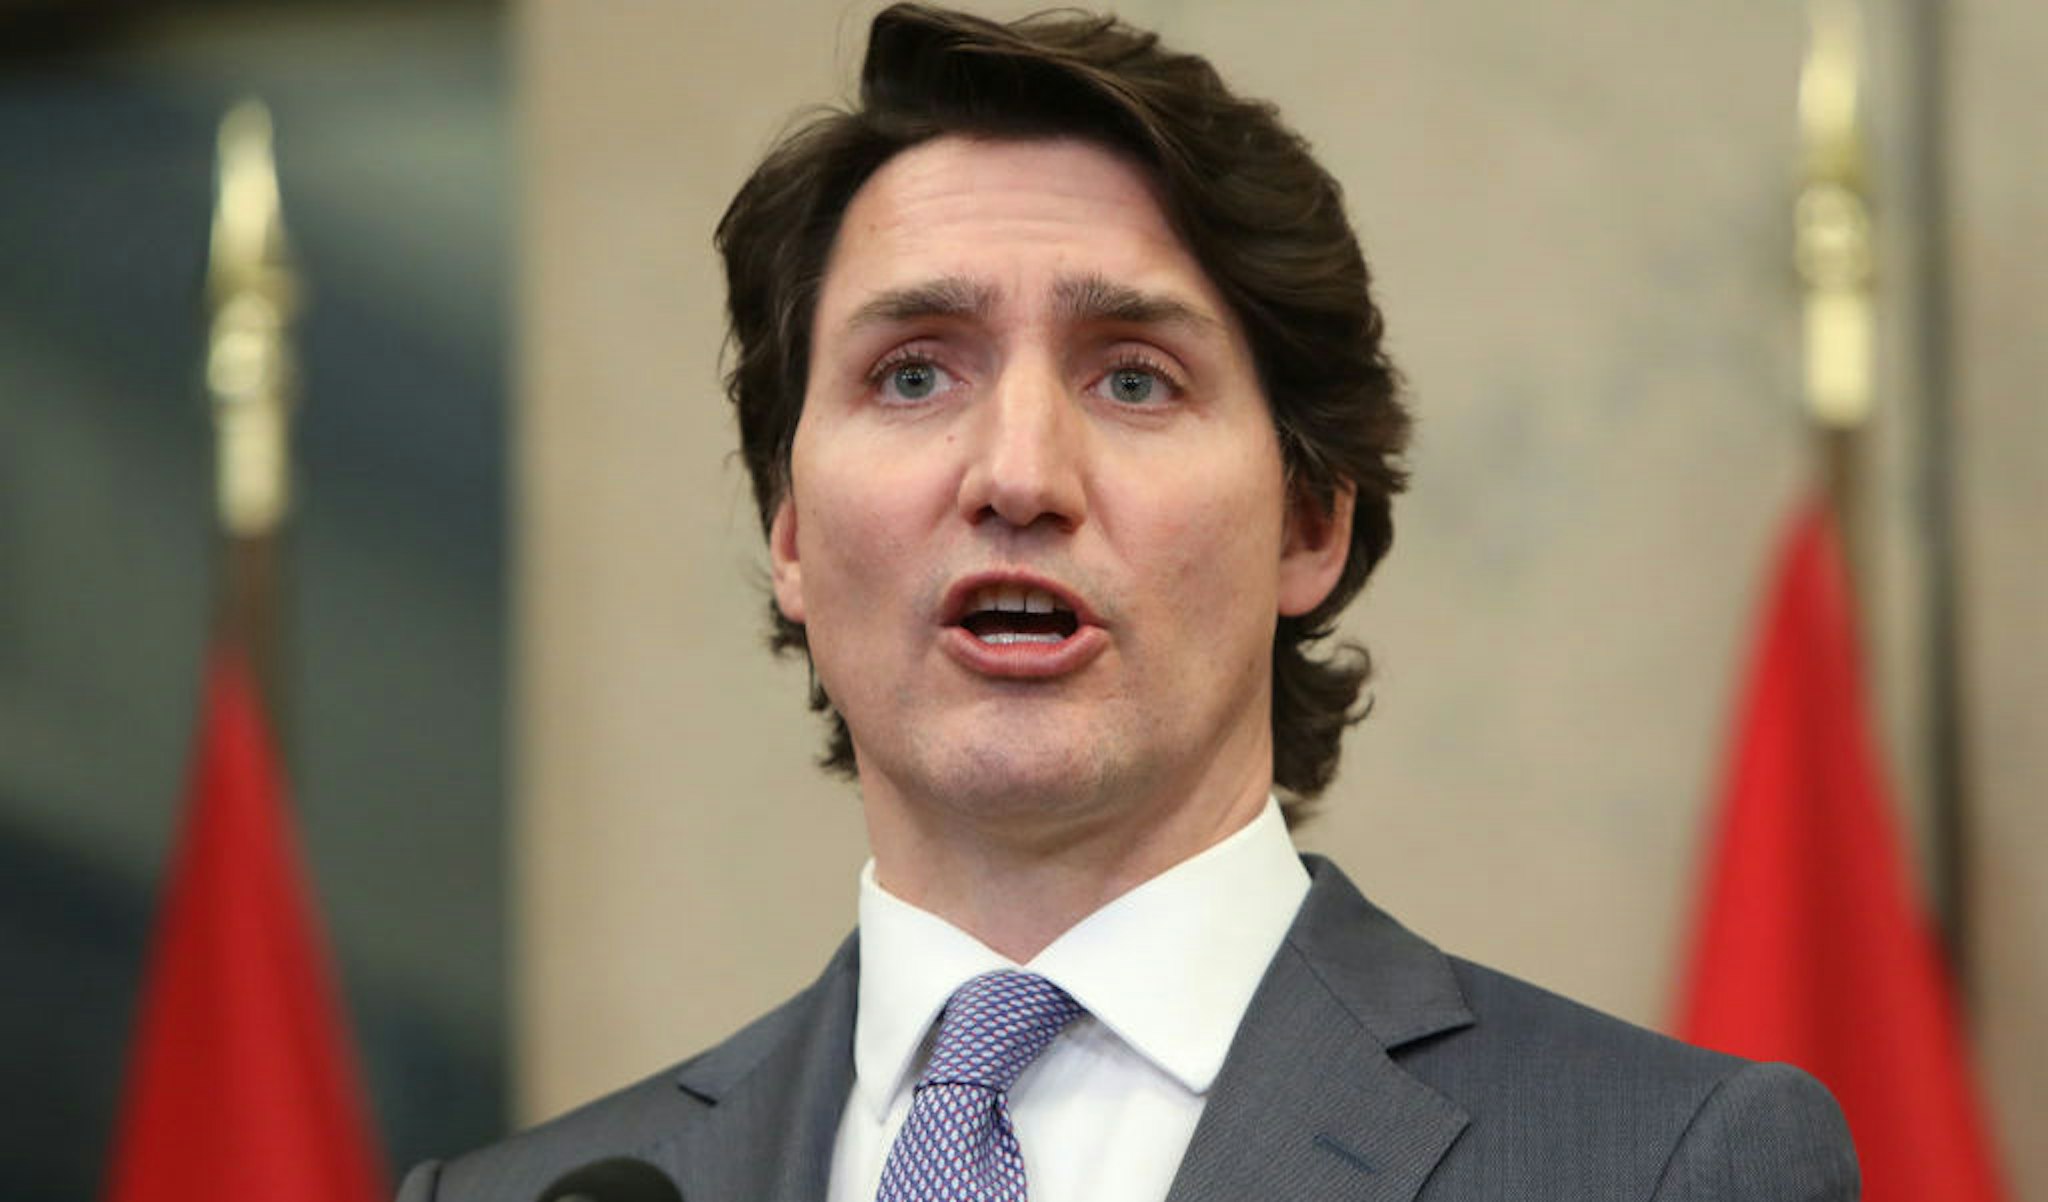 Justin Trudeau, Canada's prime minister, speaks during a news conference in Ottawa, Ontario, Canada, on Wednesday, Jan. 26, 2022. The Canadian government will extend its military training mission in Ukraine until 2025 and immediately add 60 troops to the 200 who are already there, Trudeau said. Photographer: David Kawai/Bloomberg